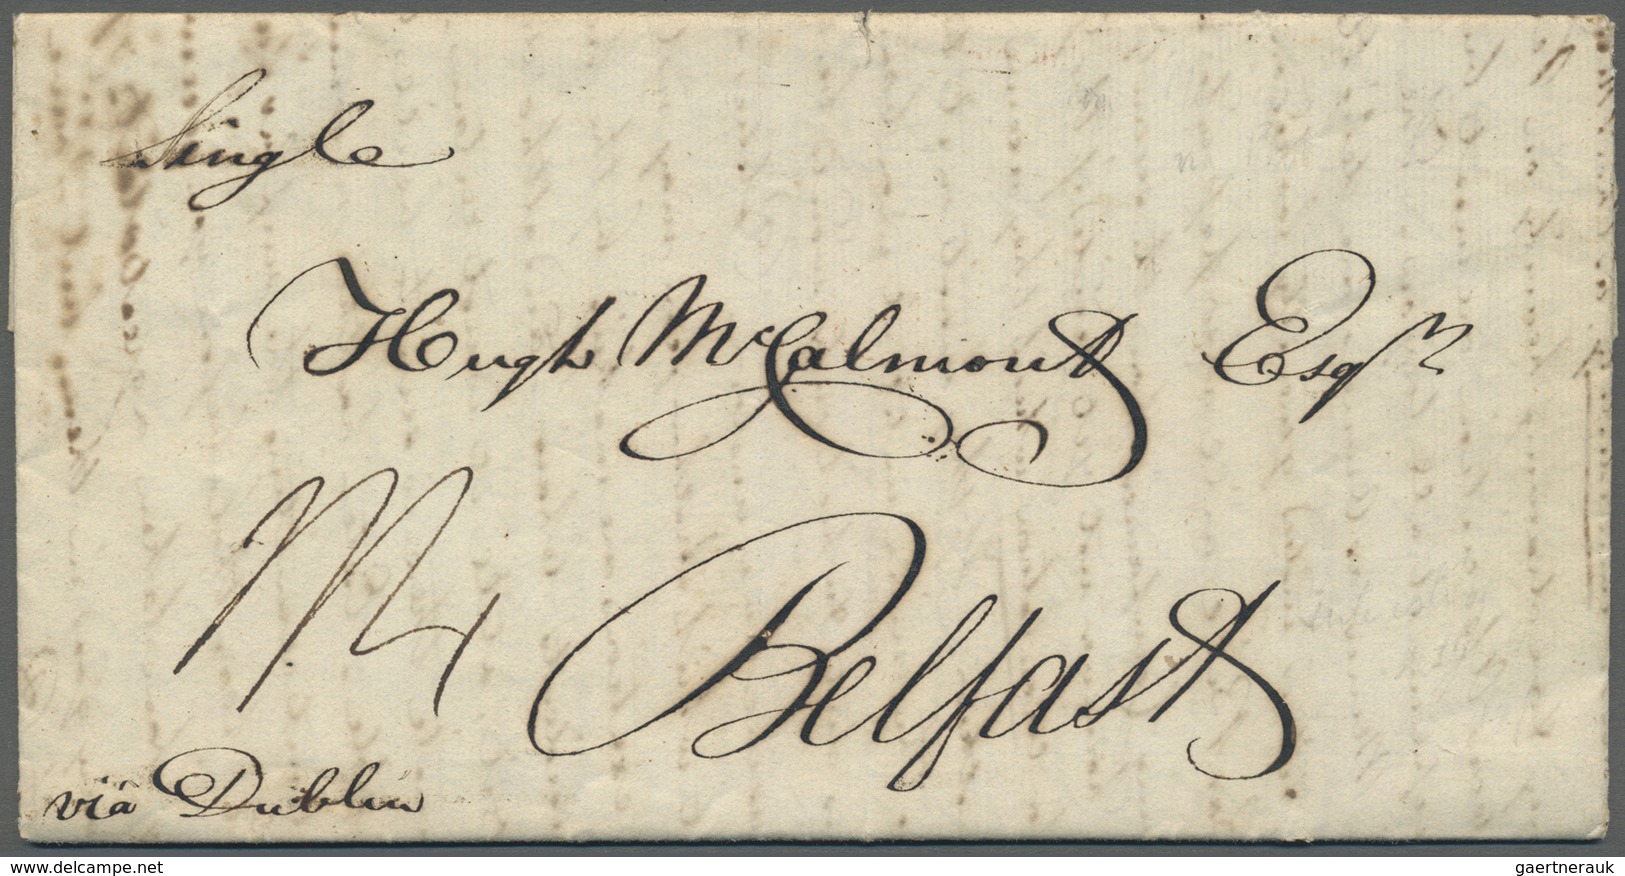 Br Mexiko: 1828. Stampless Envelope Written From Mexico Dated '24/6/1828' Addressed To 'Hugh McCalmond, - Mexico